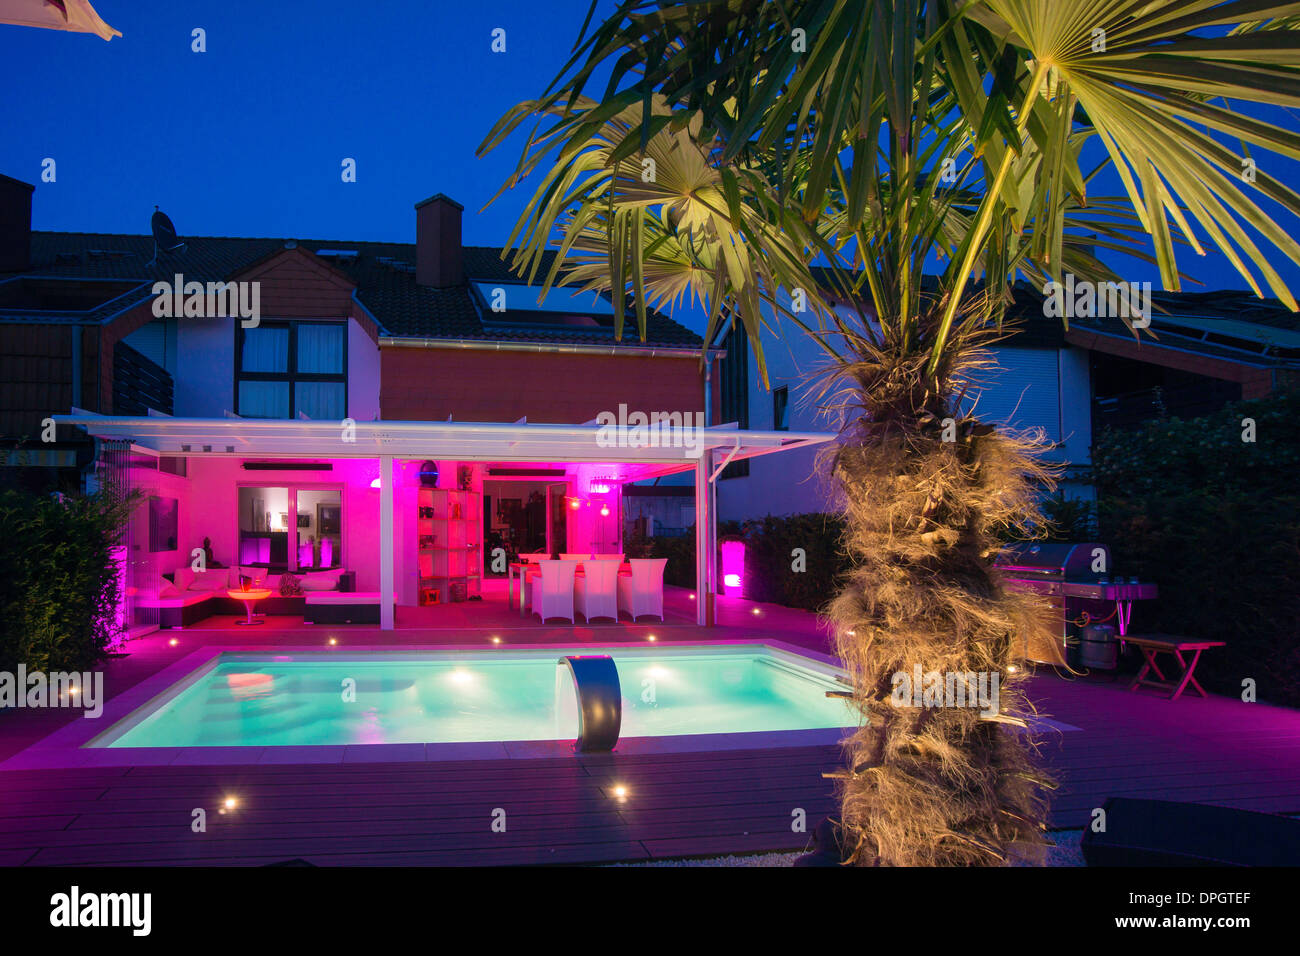 Private terraced house with garden, winter garden, pool, terrace and palm with show lighting at night in summer, Germany, Europe - August 2013 Stock Photo